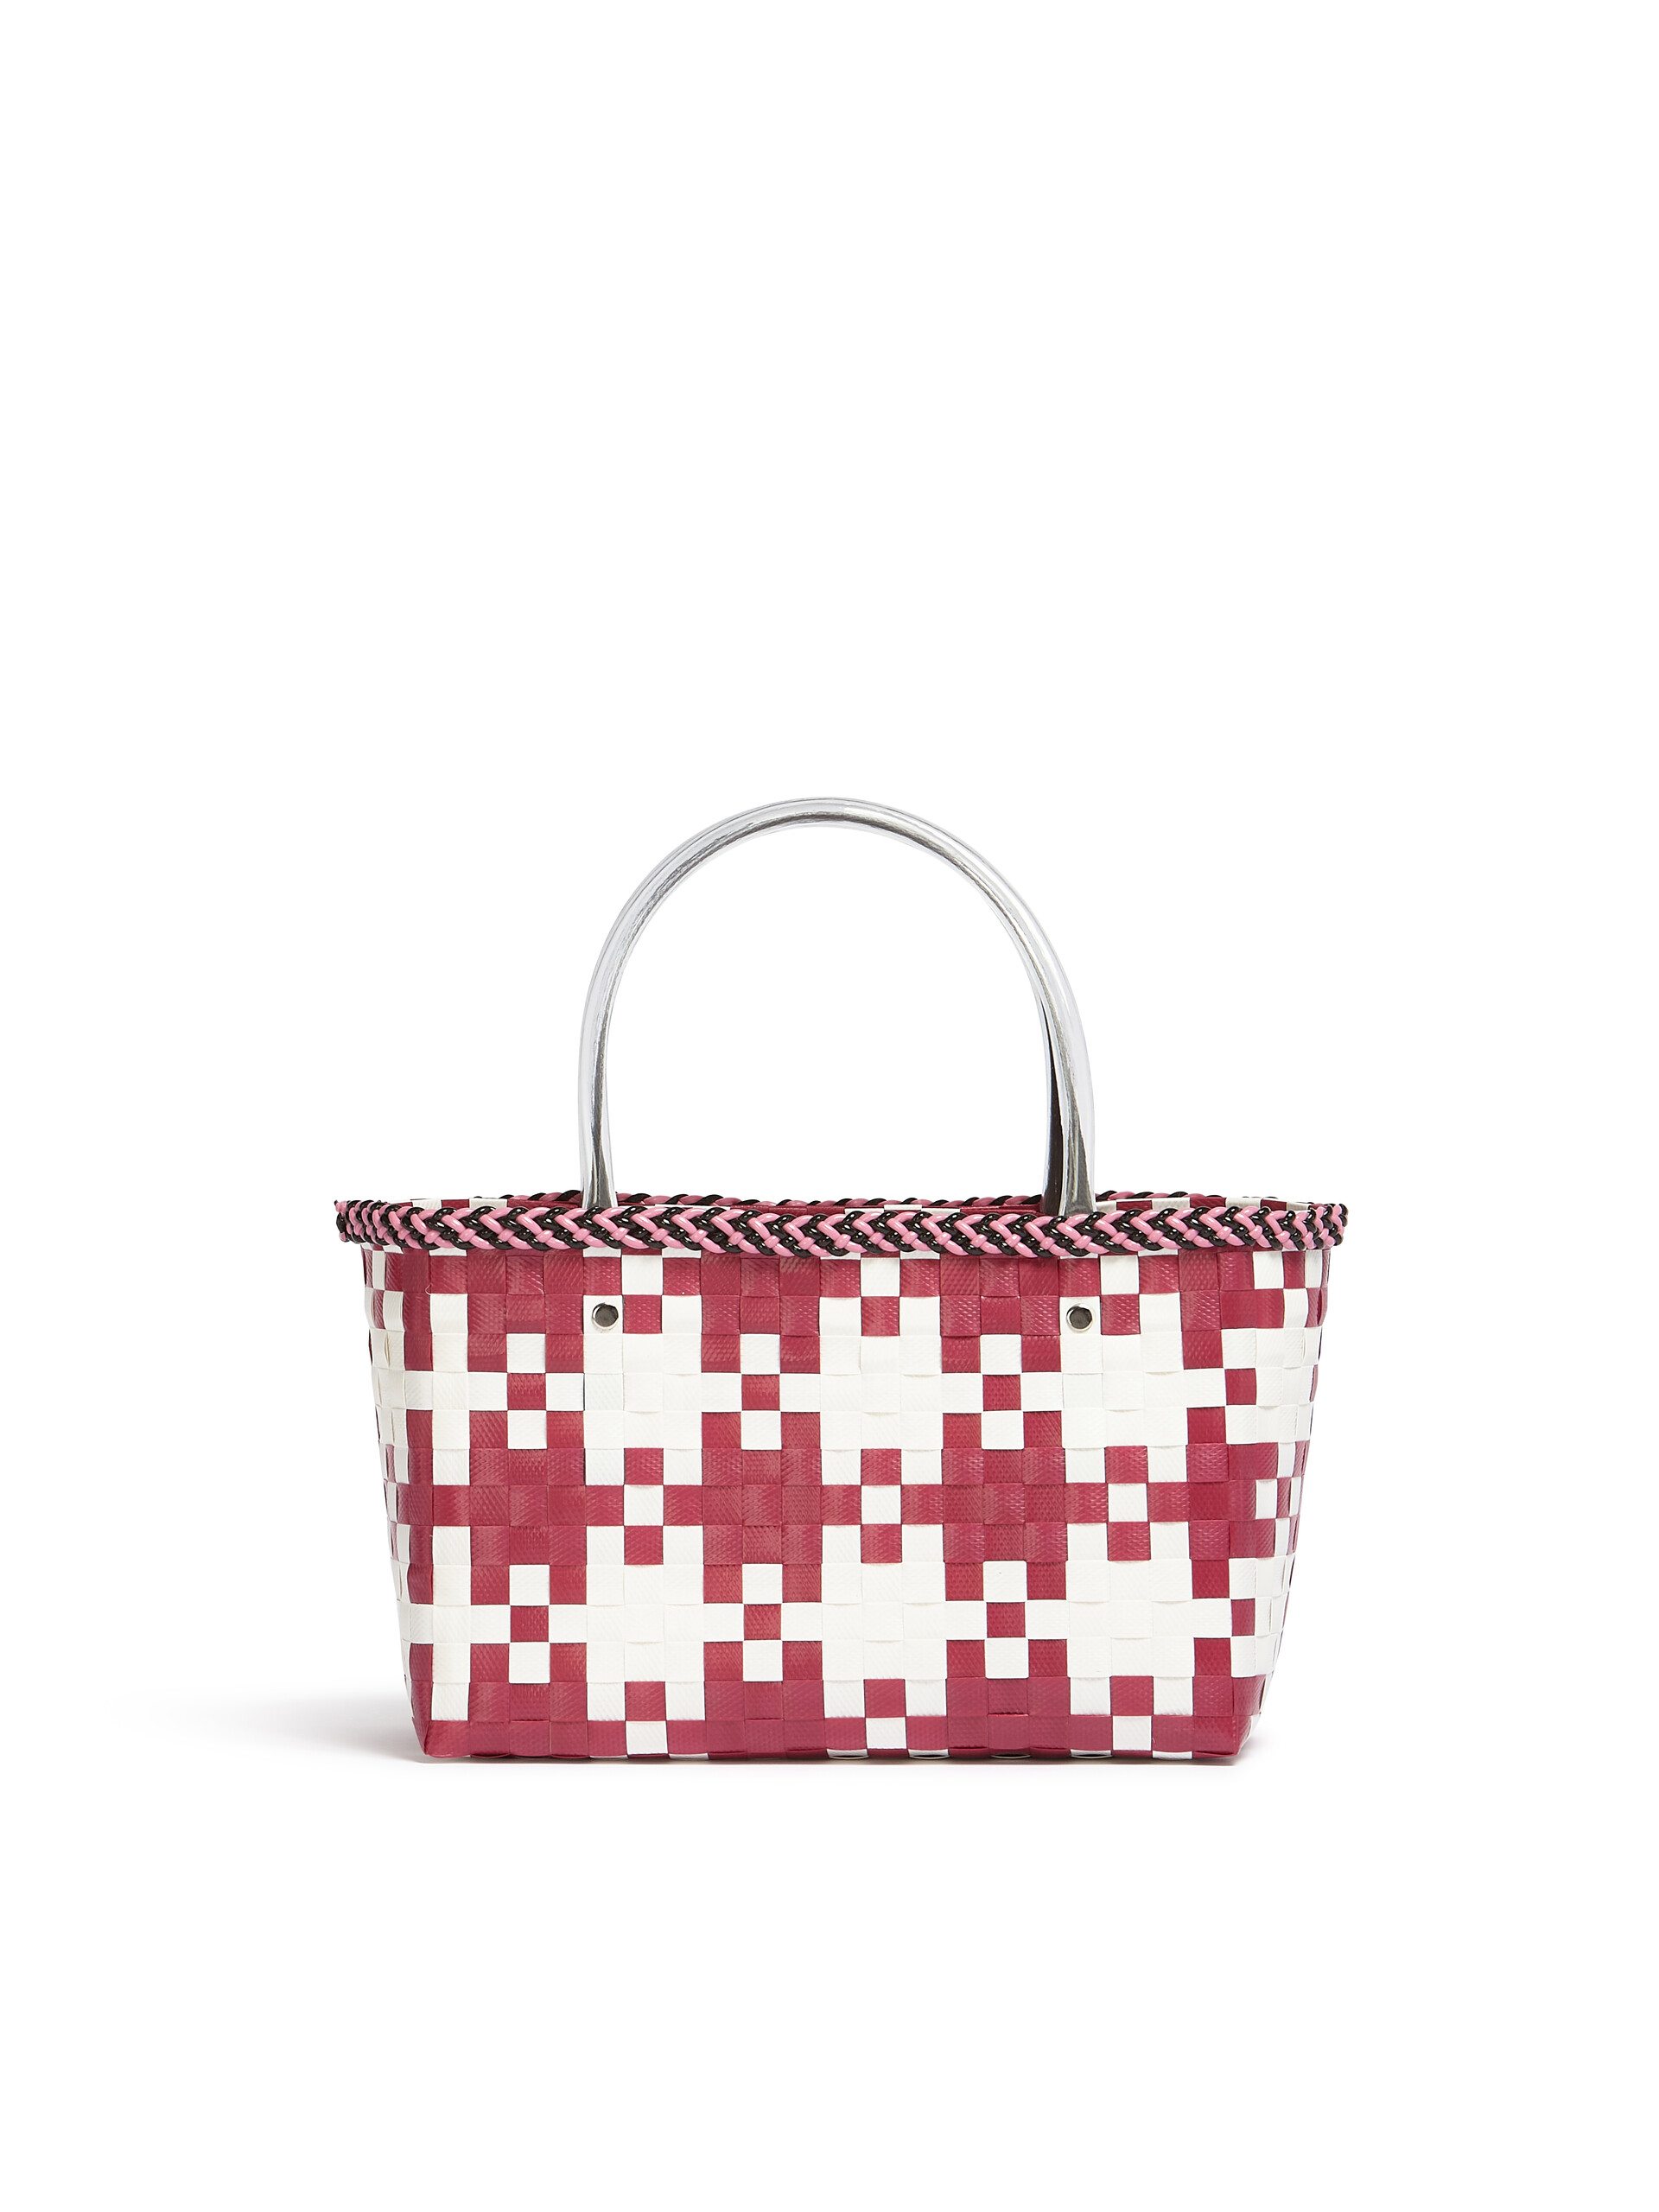 MARNI MARKET CHECK in red and white tartan woven material - Bags - Image 3